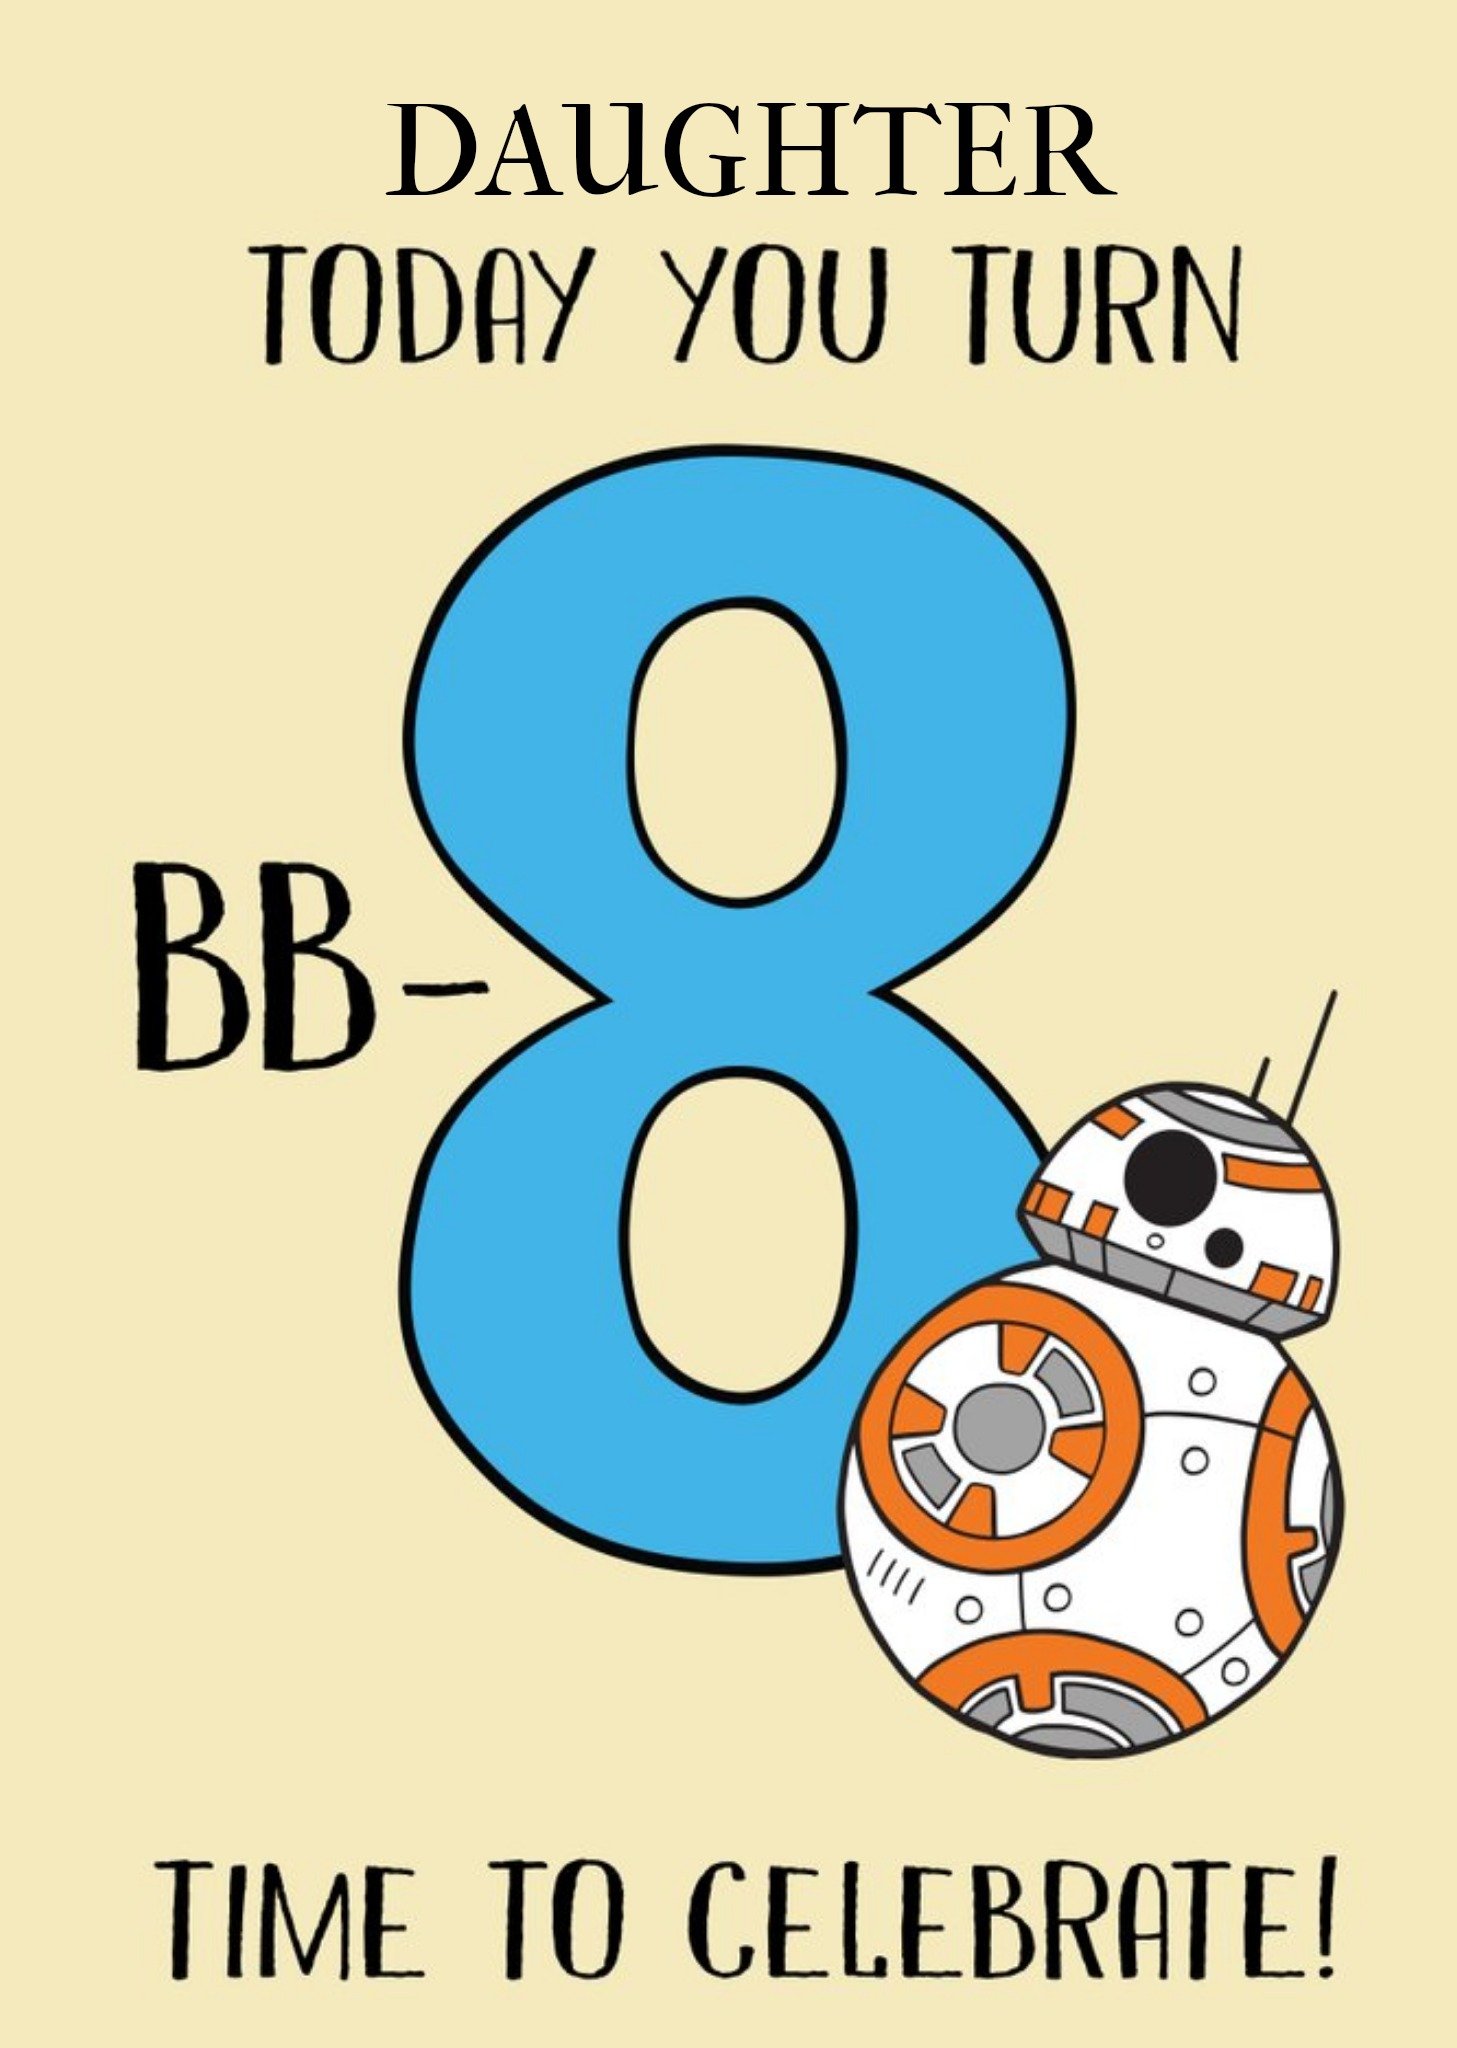 Disney Star Wars Today You Turn Bb8 Time To Celebrate Card Ecard